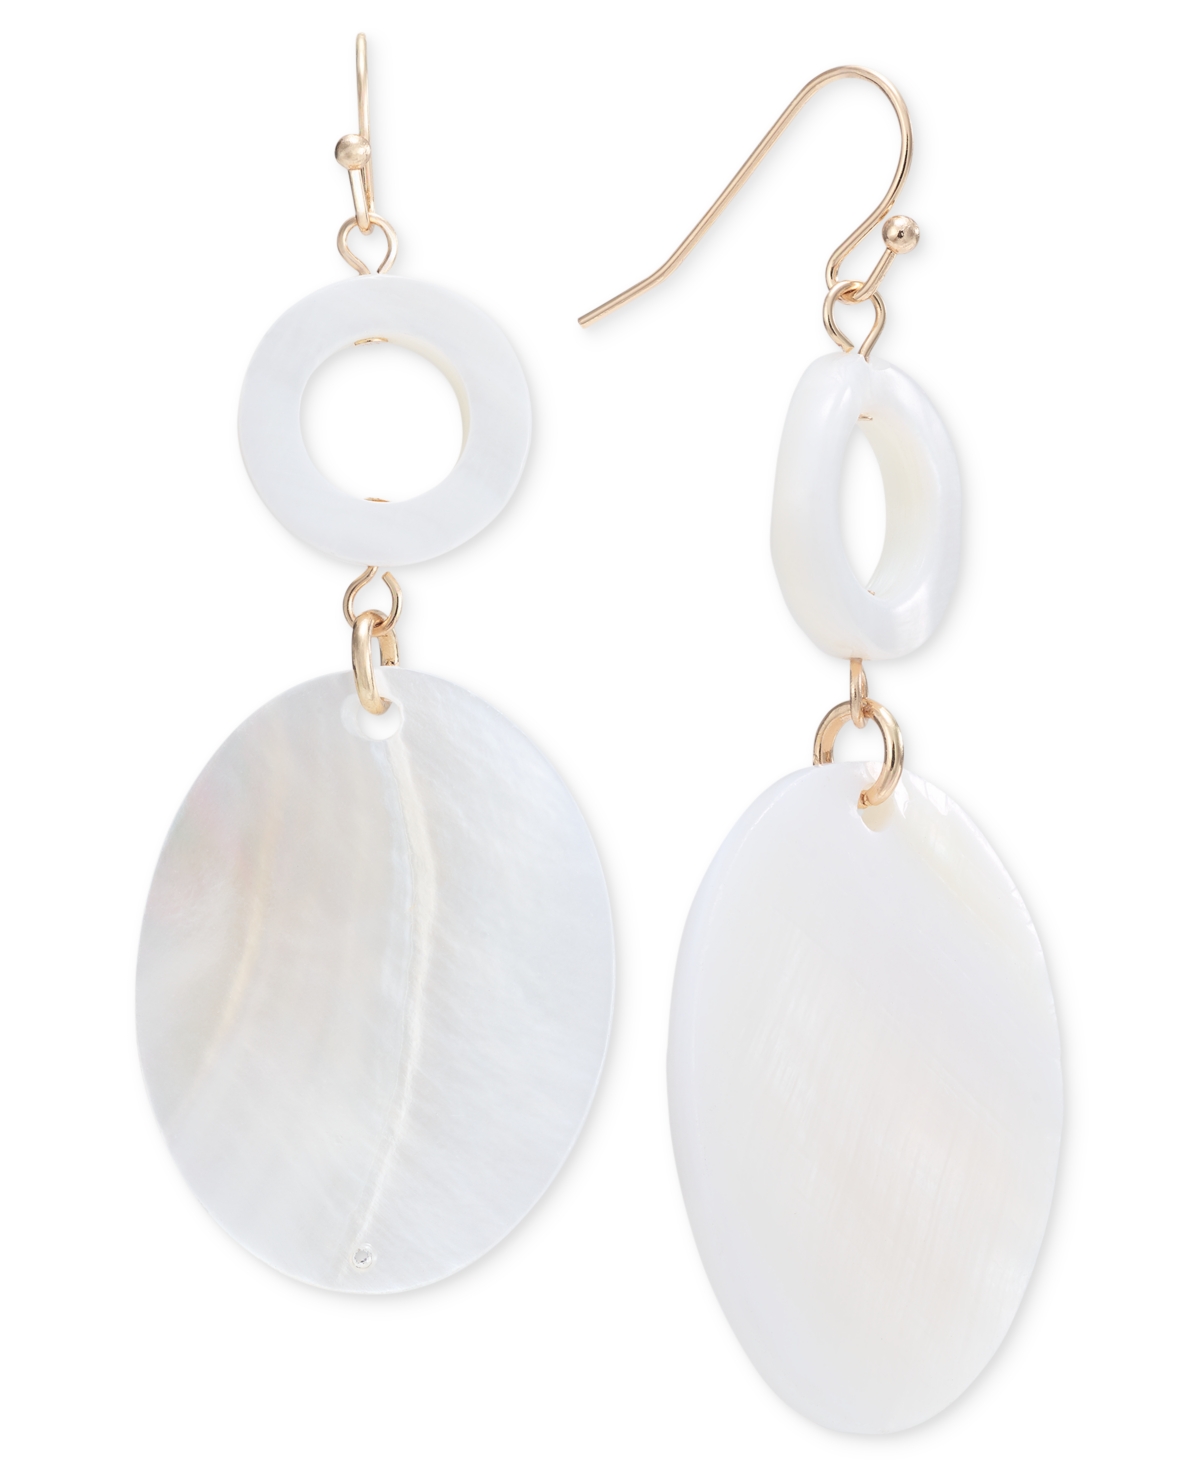 Gold-Tone Rivershell Statement Earrings, Created for Macy's - White